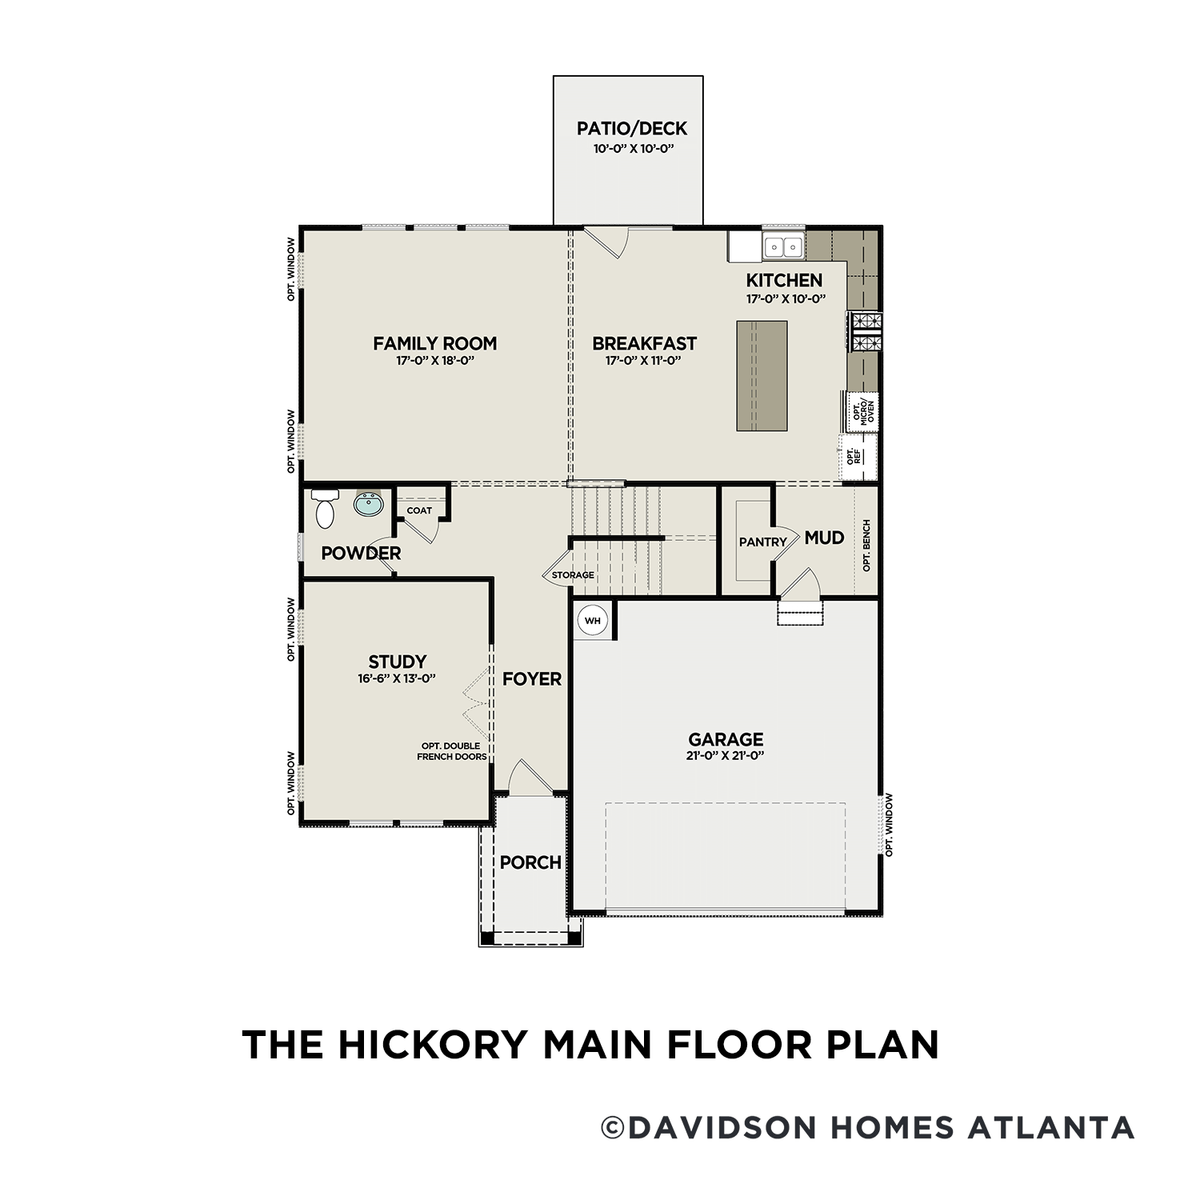 1 - The Hickory C- Unfinished Basement floor plan layout for 40 Brookside Way in Davidson Homes' Mountainbrook community.